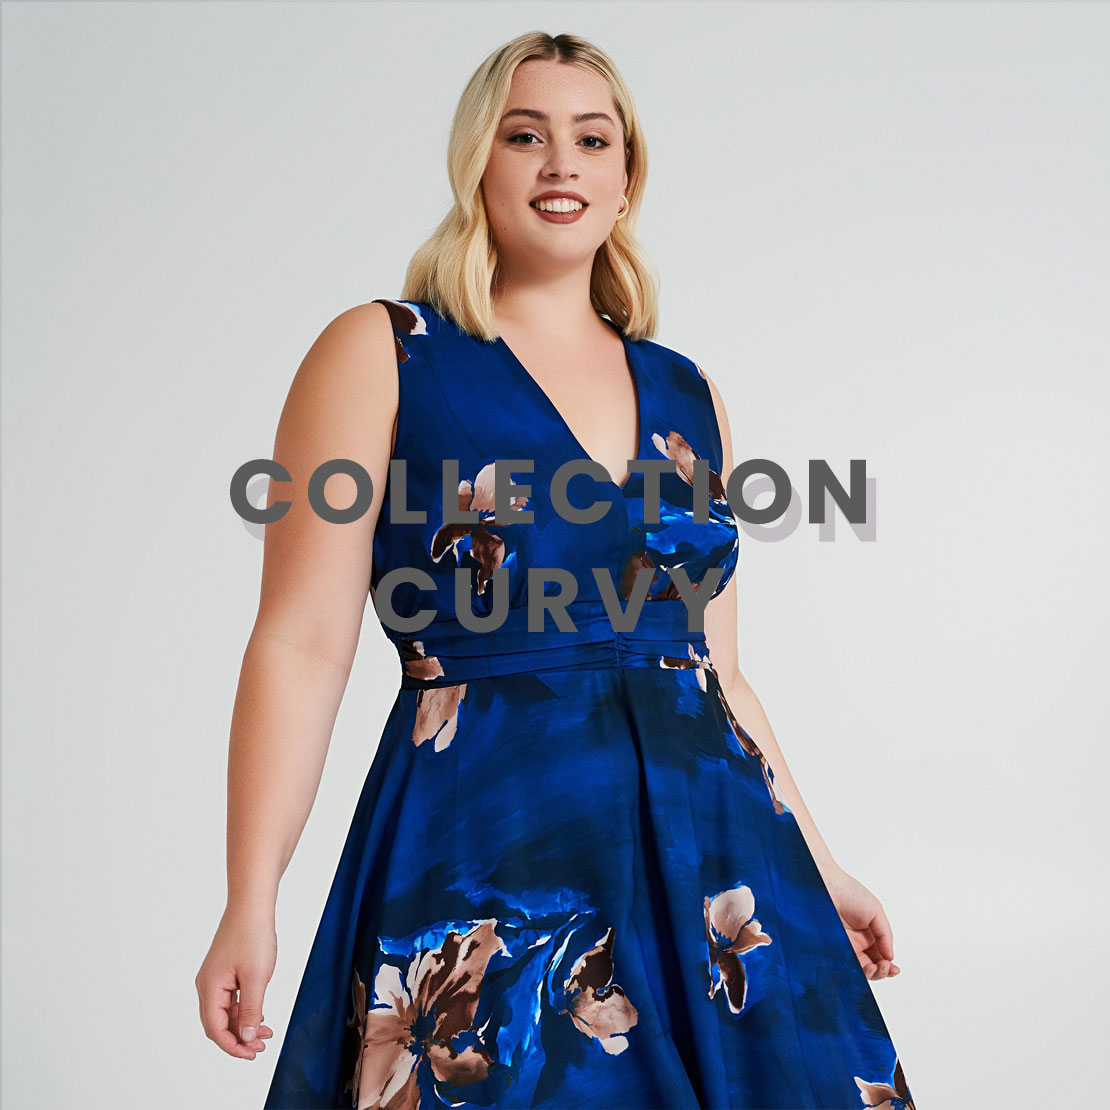 Collection Curvy